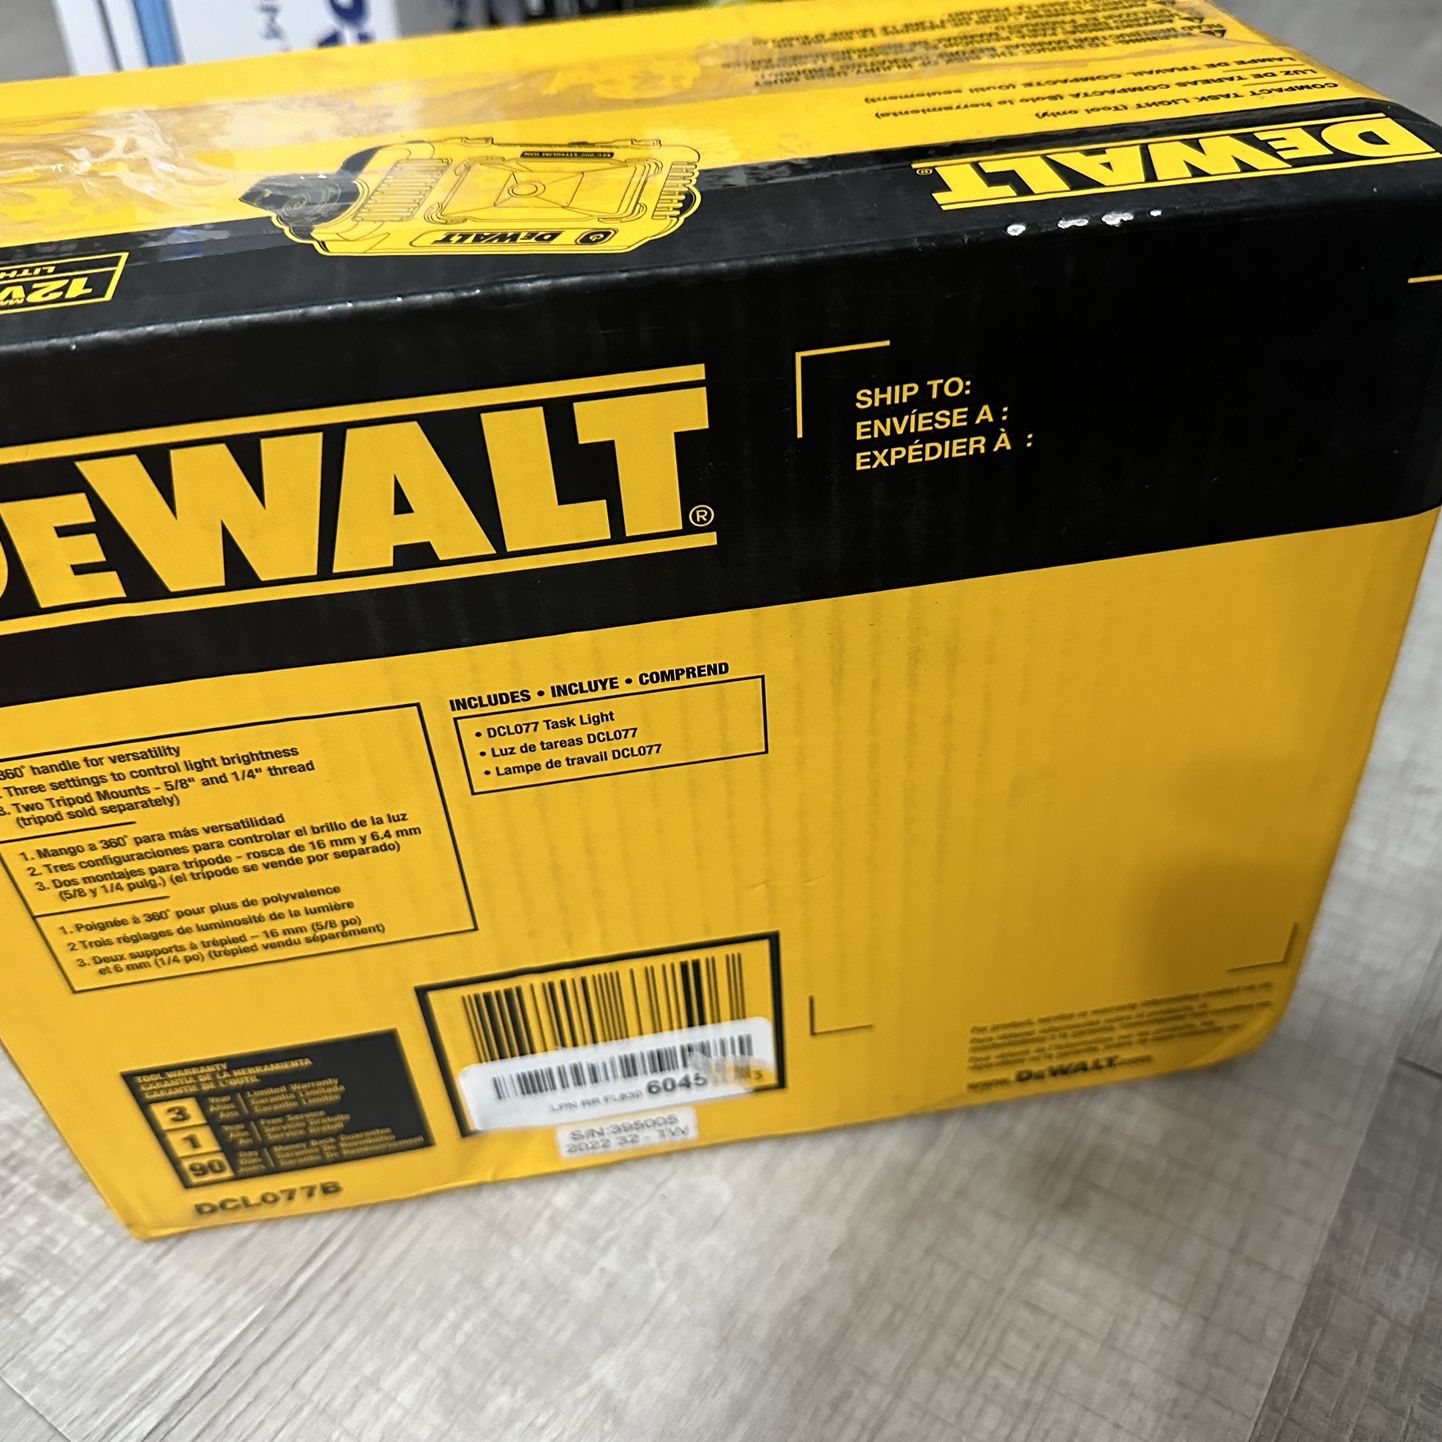 DEWALT 12V/20V MAX LED Work Light, Compact with 360 Degree Rotating Handle, 2000  Lumens of Brightness, Cordless, Bare Tool Only for Sale in Houston, TX  OfferUp